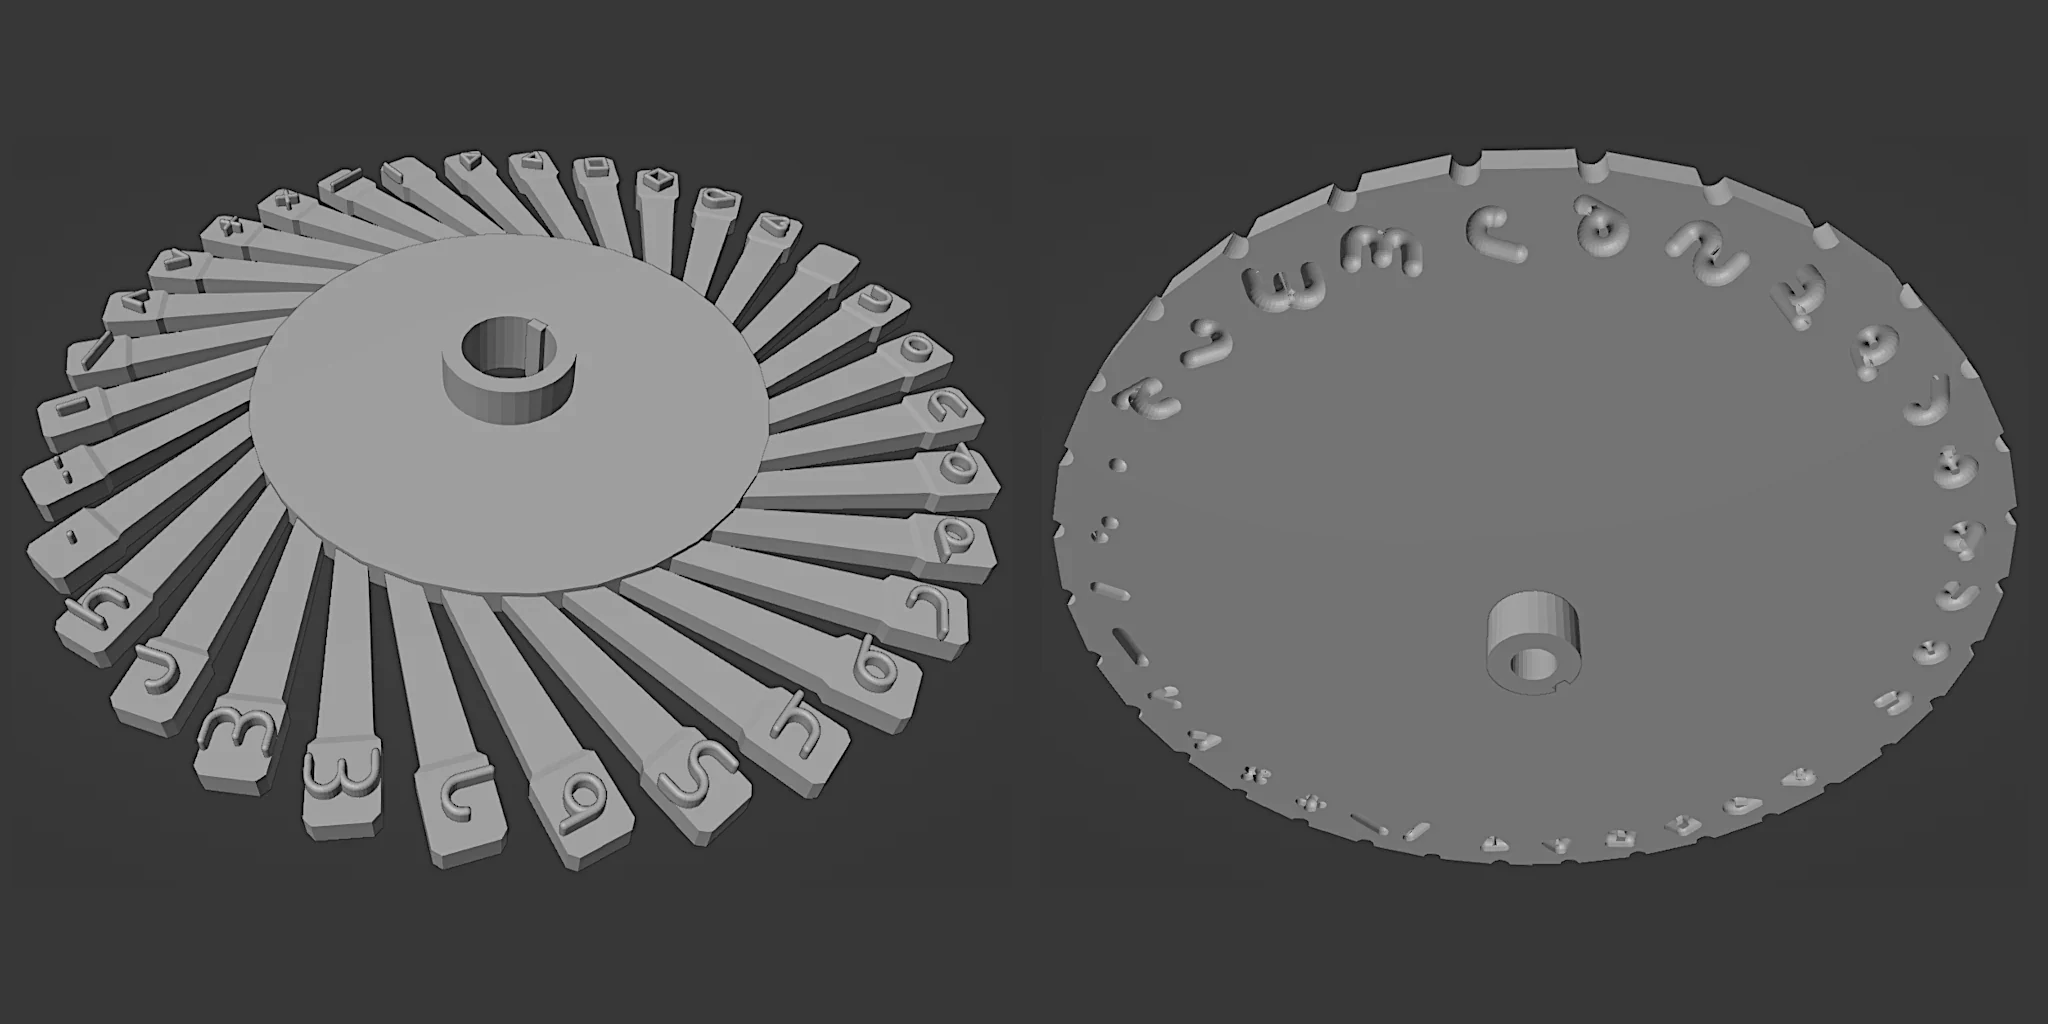 Blender model of the new punch-wheel parts.